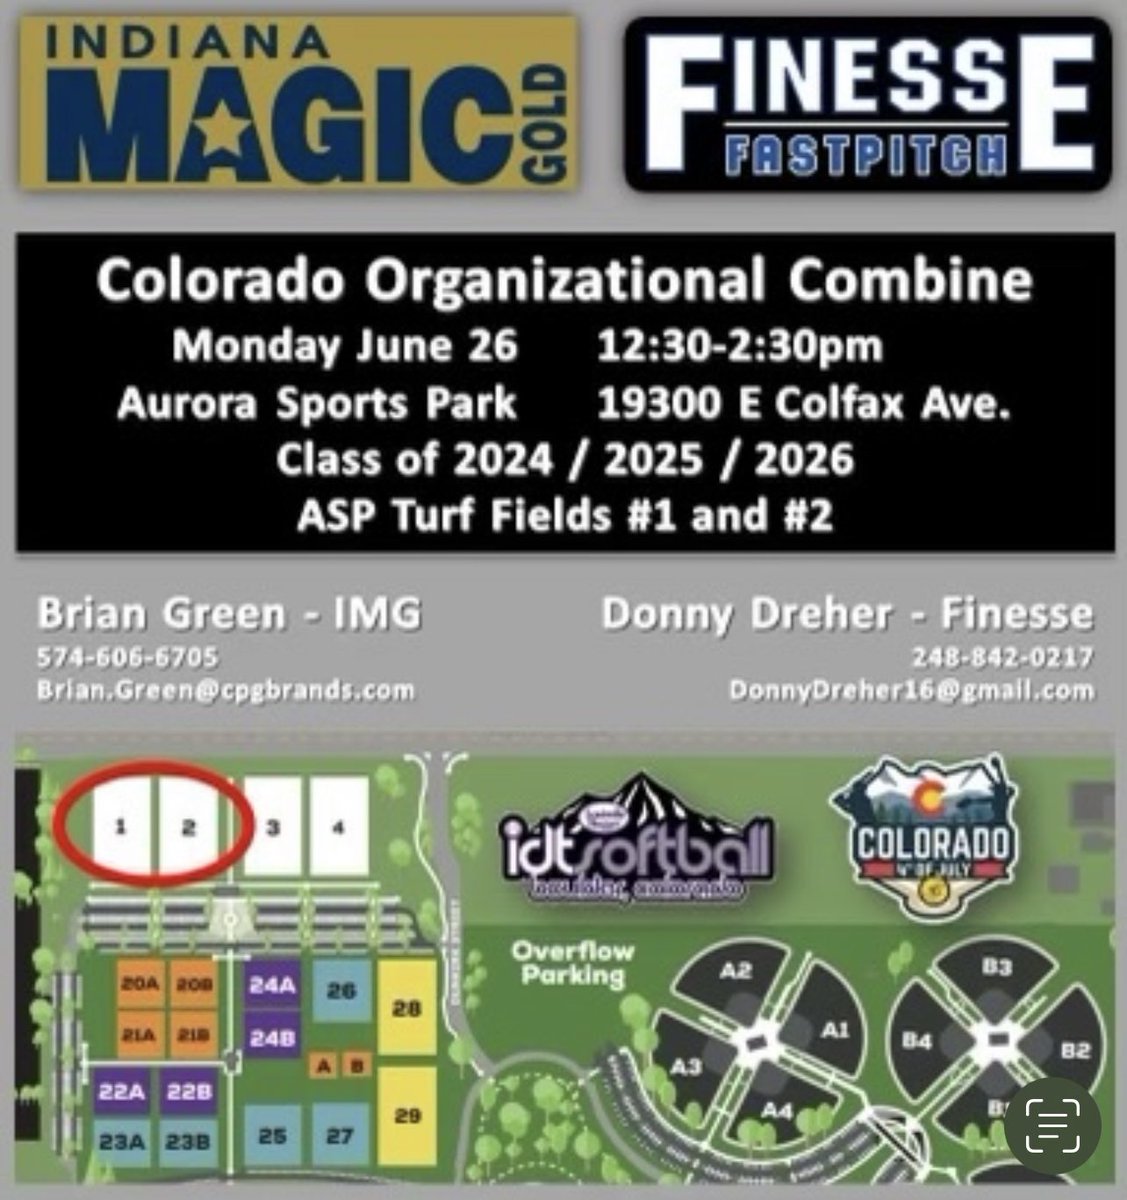 Excited for the Finesse / IMG workout this coming Monday in Colorado!!! @FinesseOrg @donnysoftball @ExtraInningSB @IHartFastpitch @D1Uncommitted @D1Softball @triplecrownspts